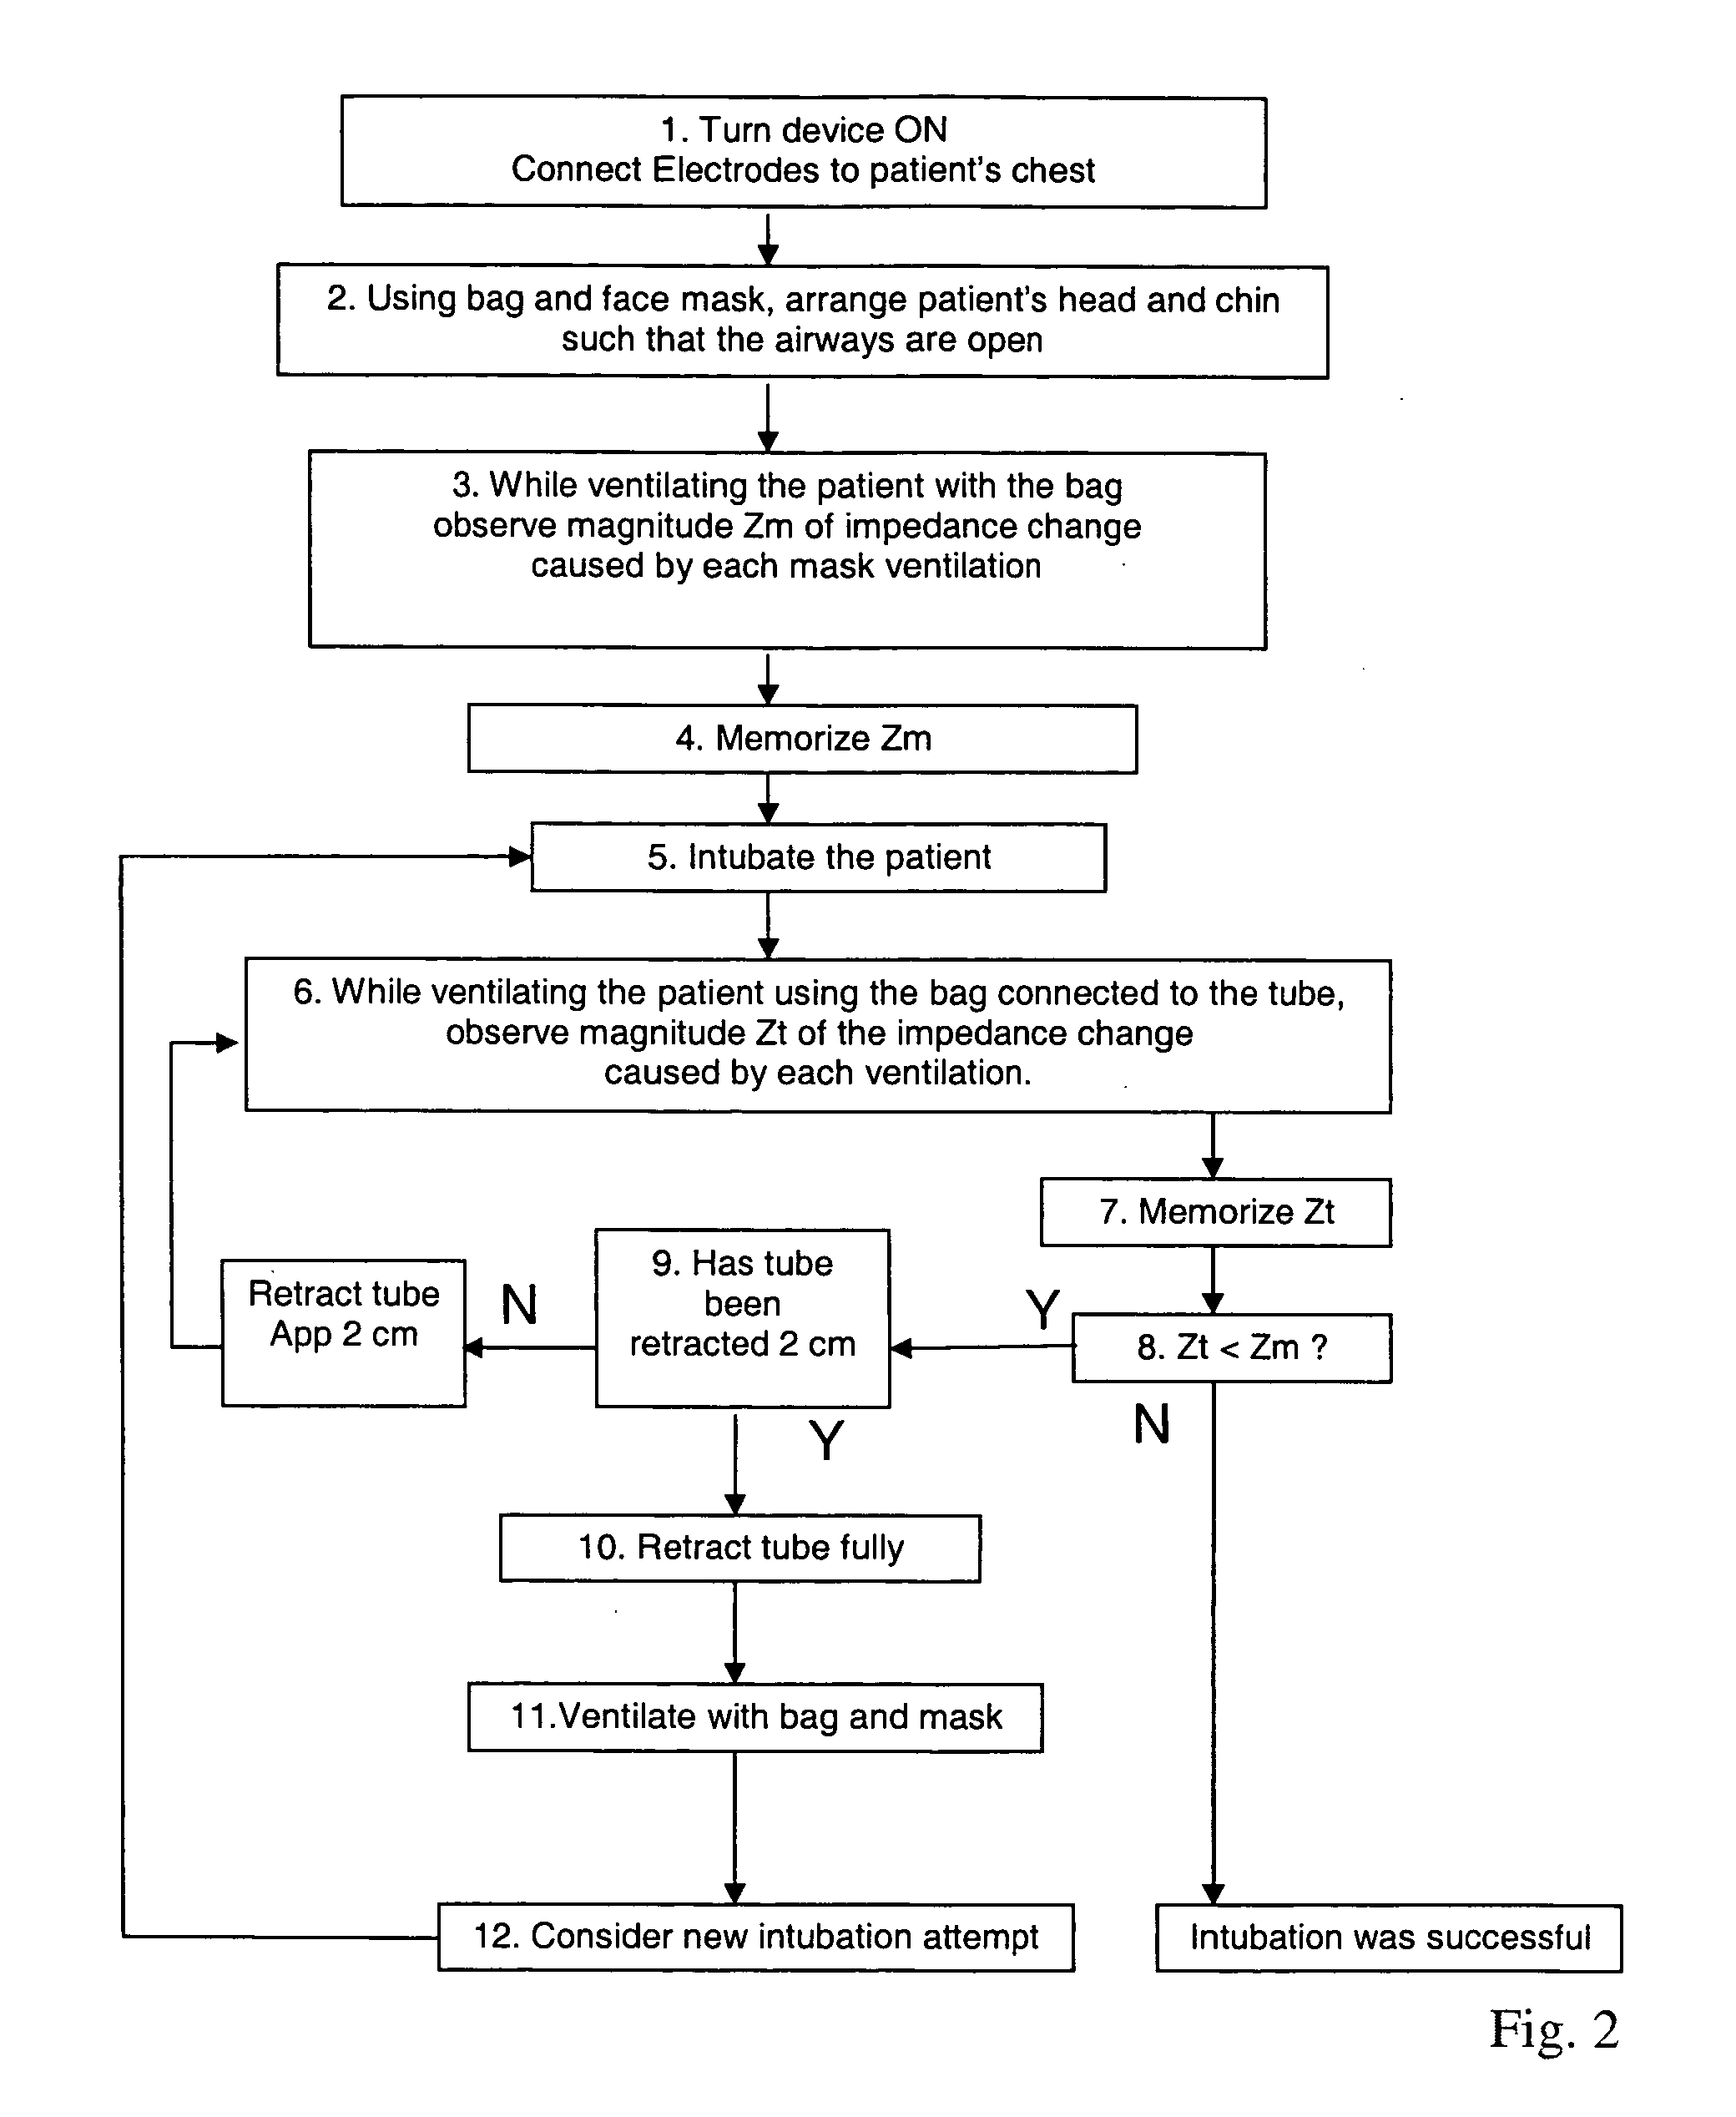 Method and system to determine correct tube placement during resuscitation